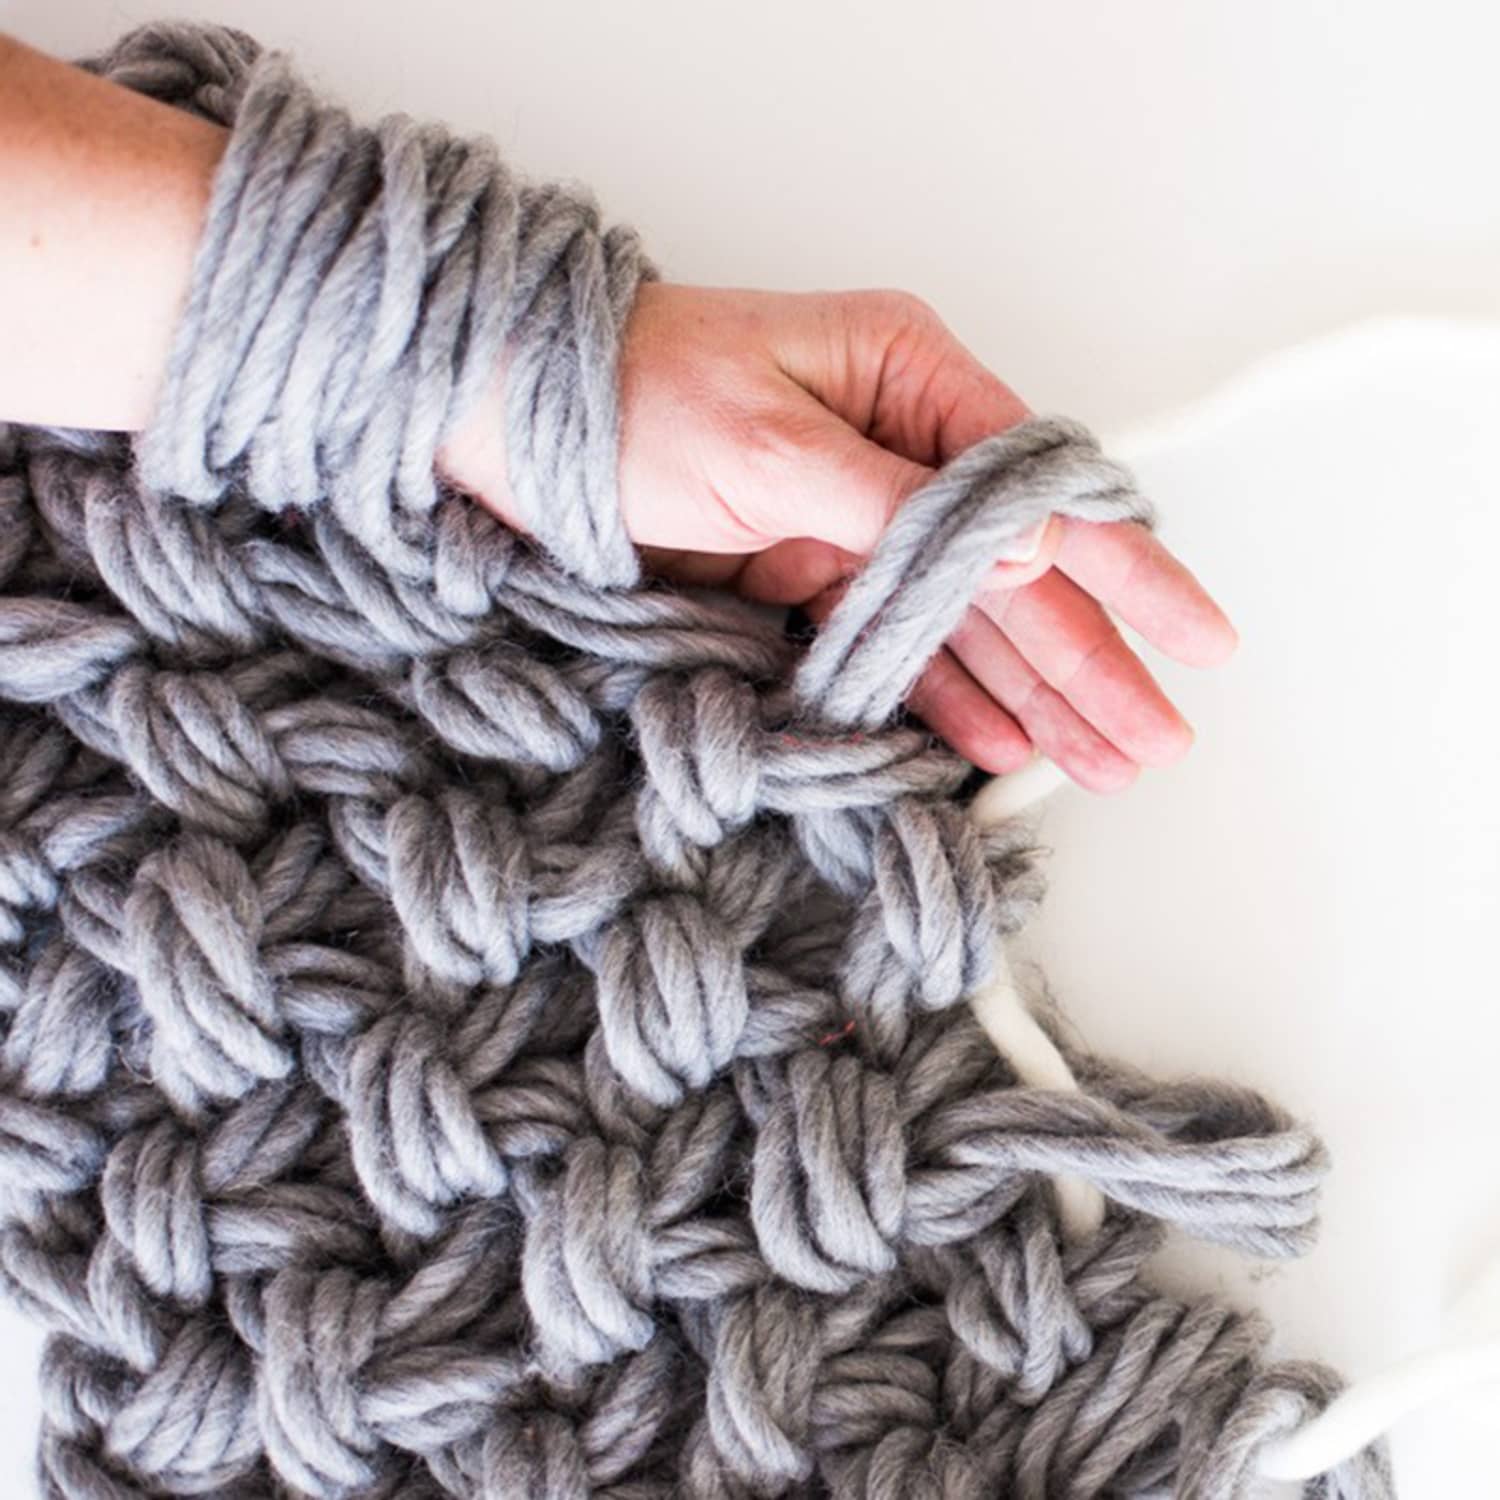 How to Finger Crochet a Market Bag Using Thin Yarn in 30 Minutes with  Simply Maggie 